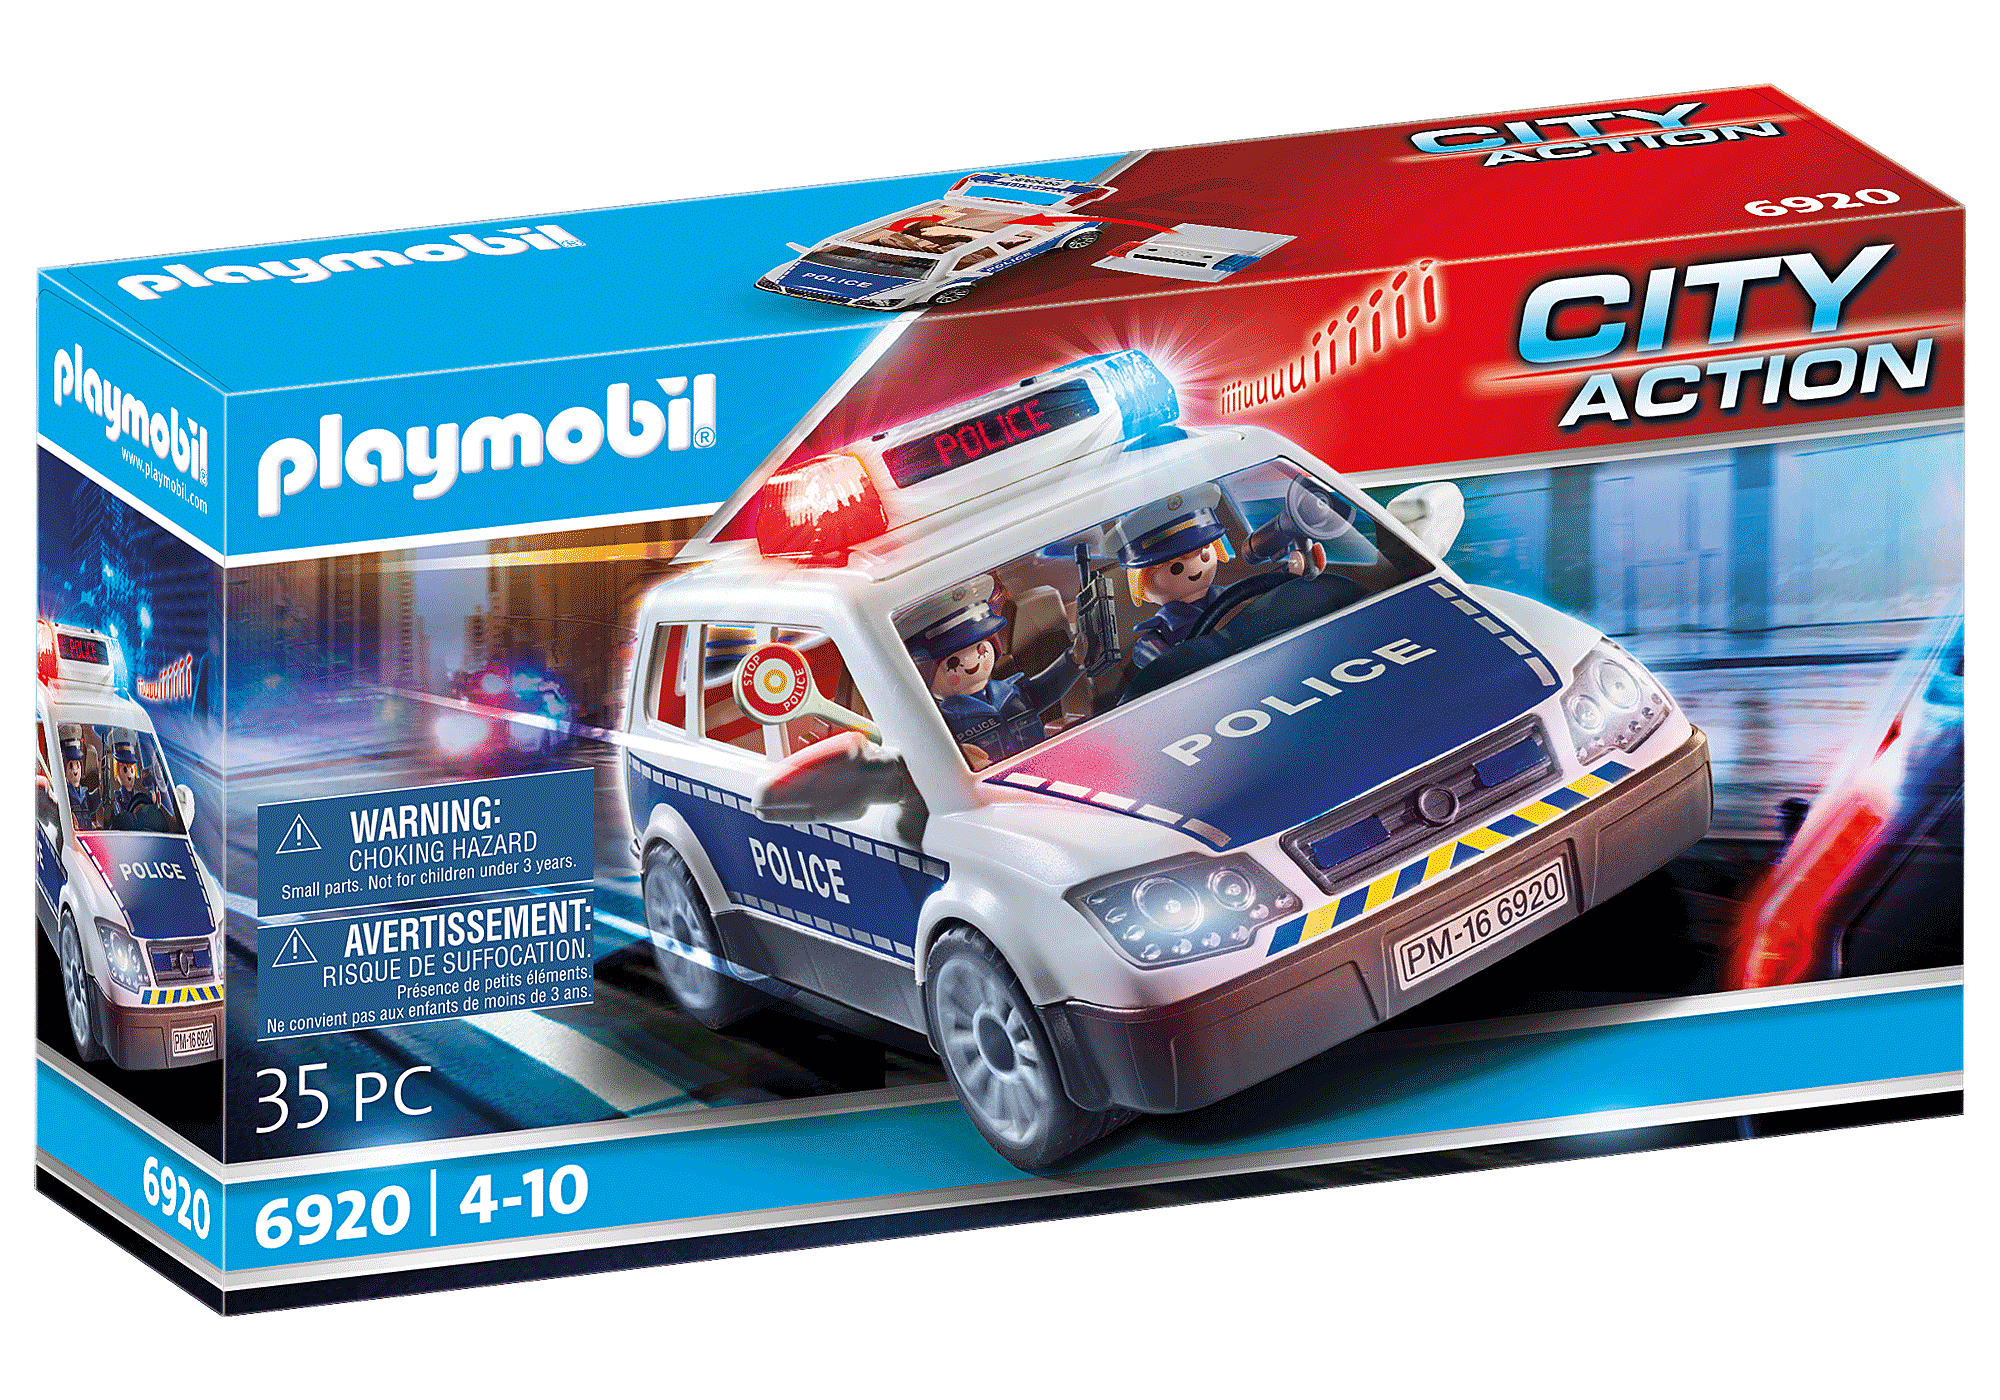 krom Oven school Squad Car with Lights and Sound - 6920 | PLAYMOBIL®